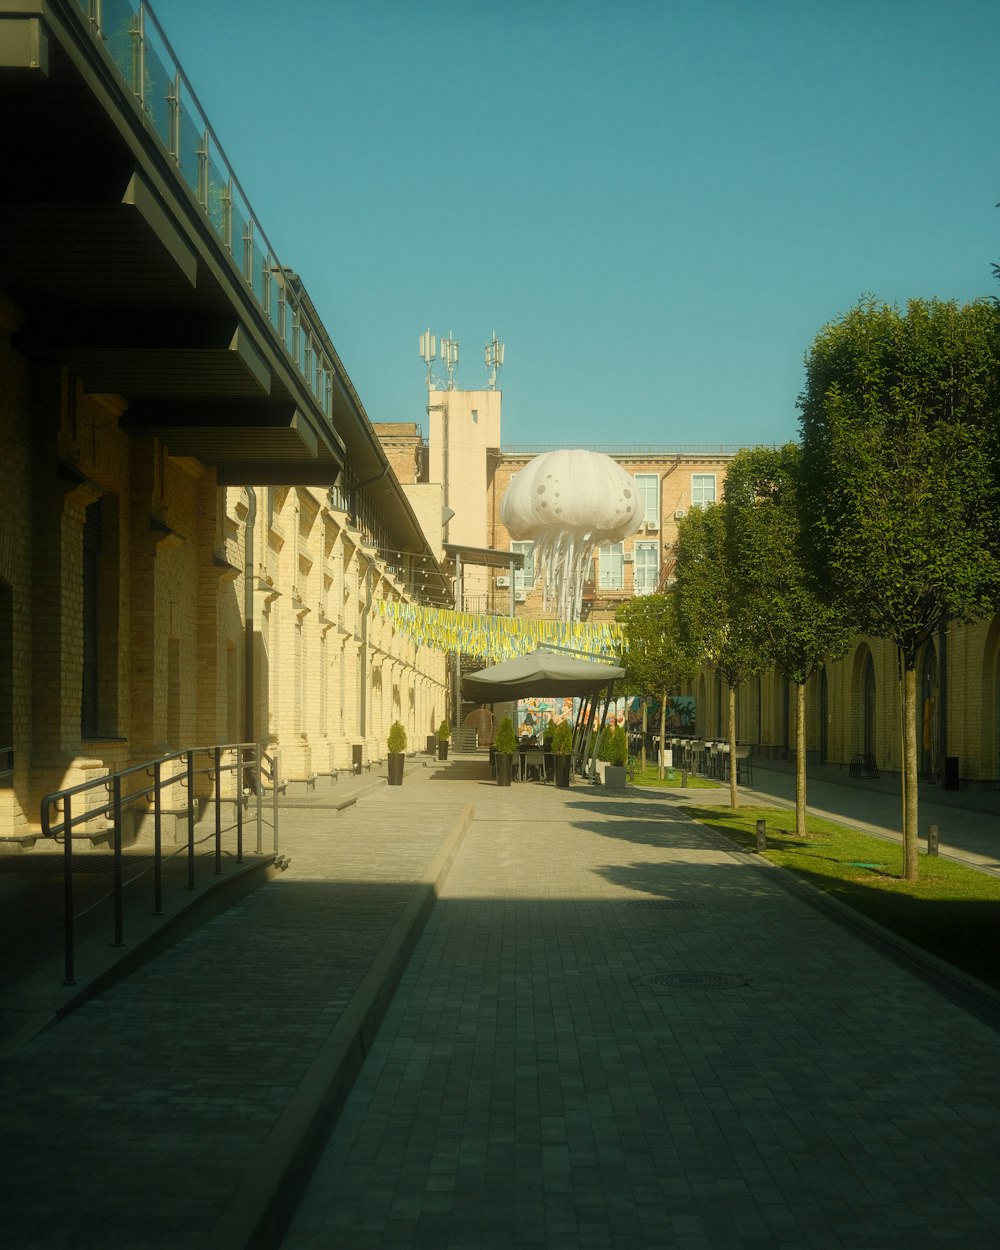 a walkway between two buildings with a large elephant statue in the background